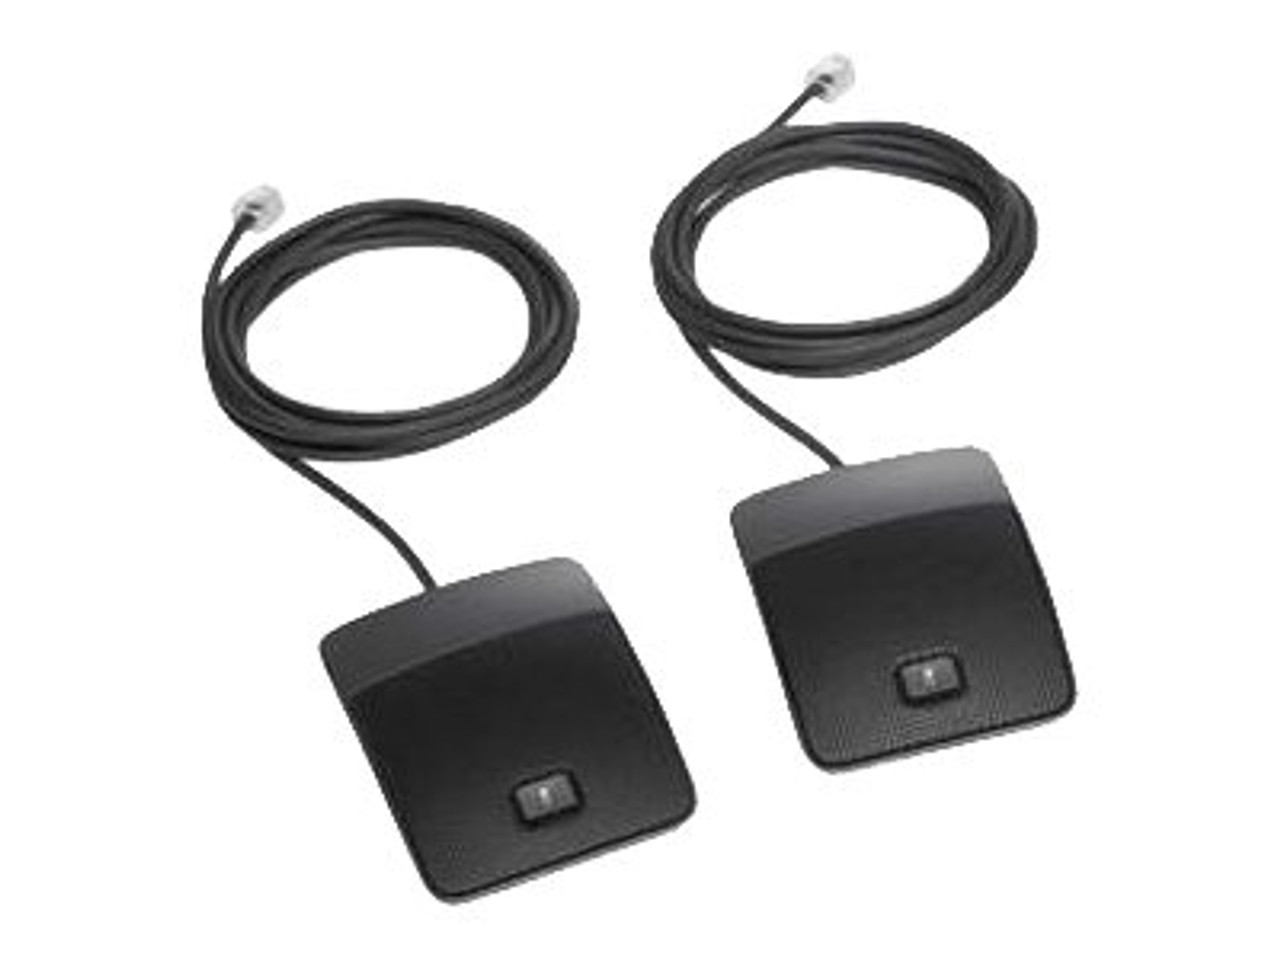 *Optional Wired Microphone Kit for Cisco Unified IP Conference Phone 8831 - 2 Wired microphones - CP-MIC-WIRED-S=